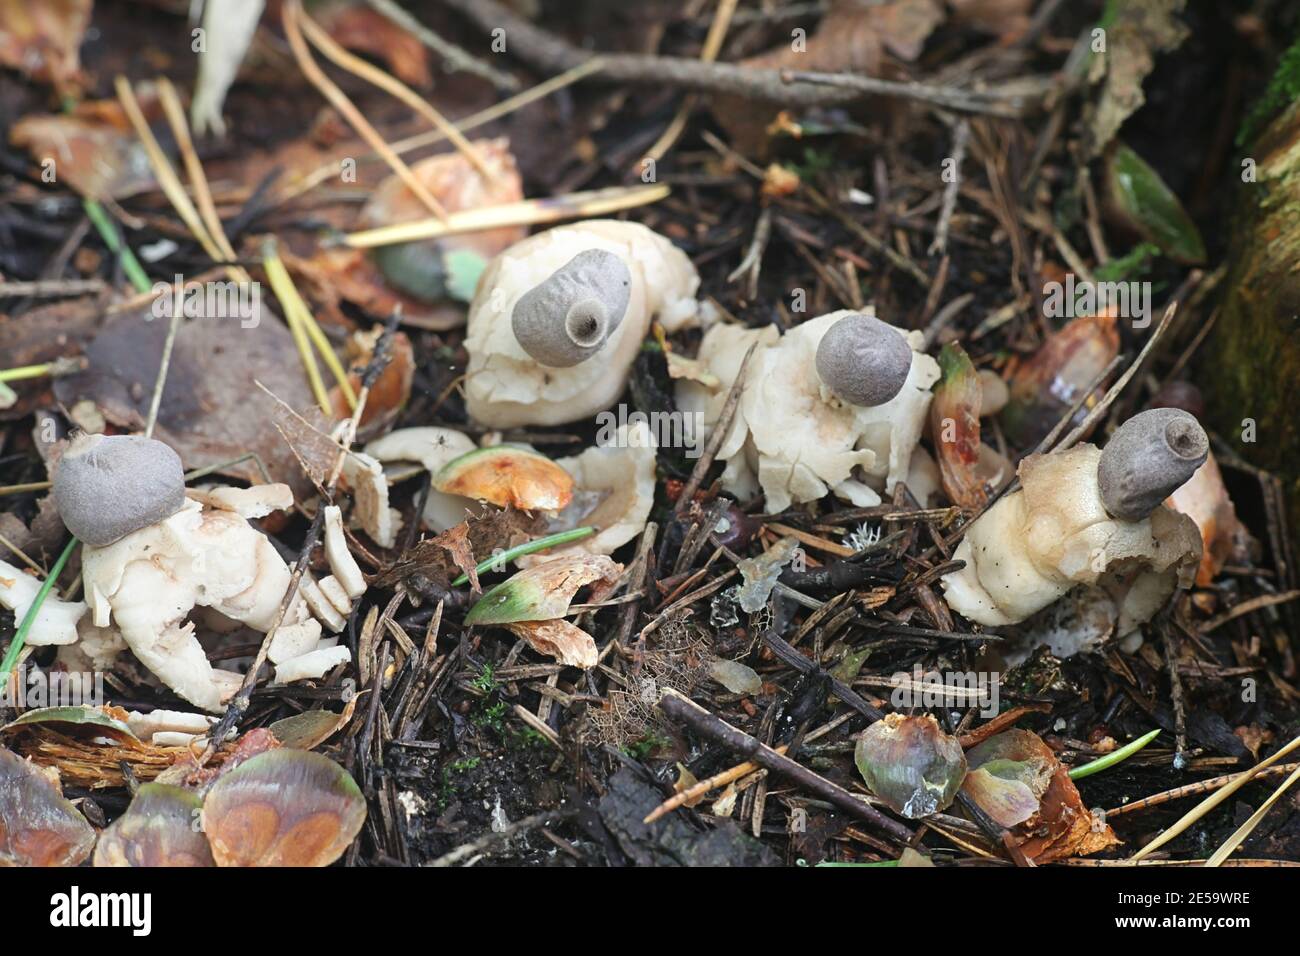 Geastrum quadrifidum, known as the rayed earthstar or four-footed earthstar, wild fungus from Finland Stock Photo